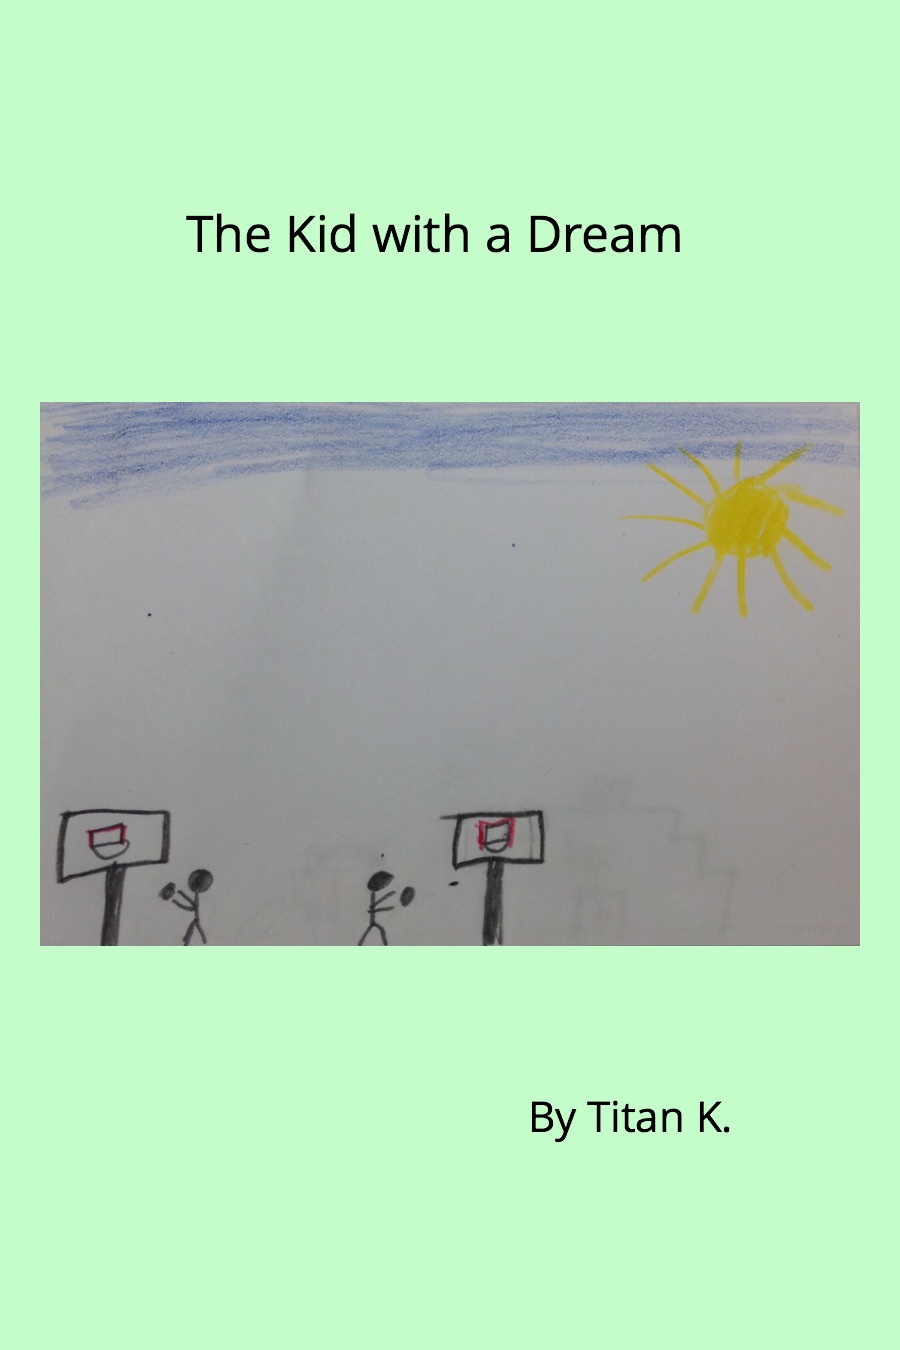 The Kid with a Dream